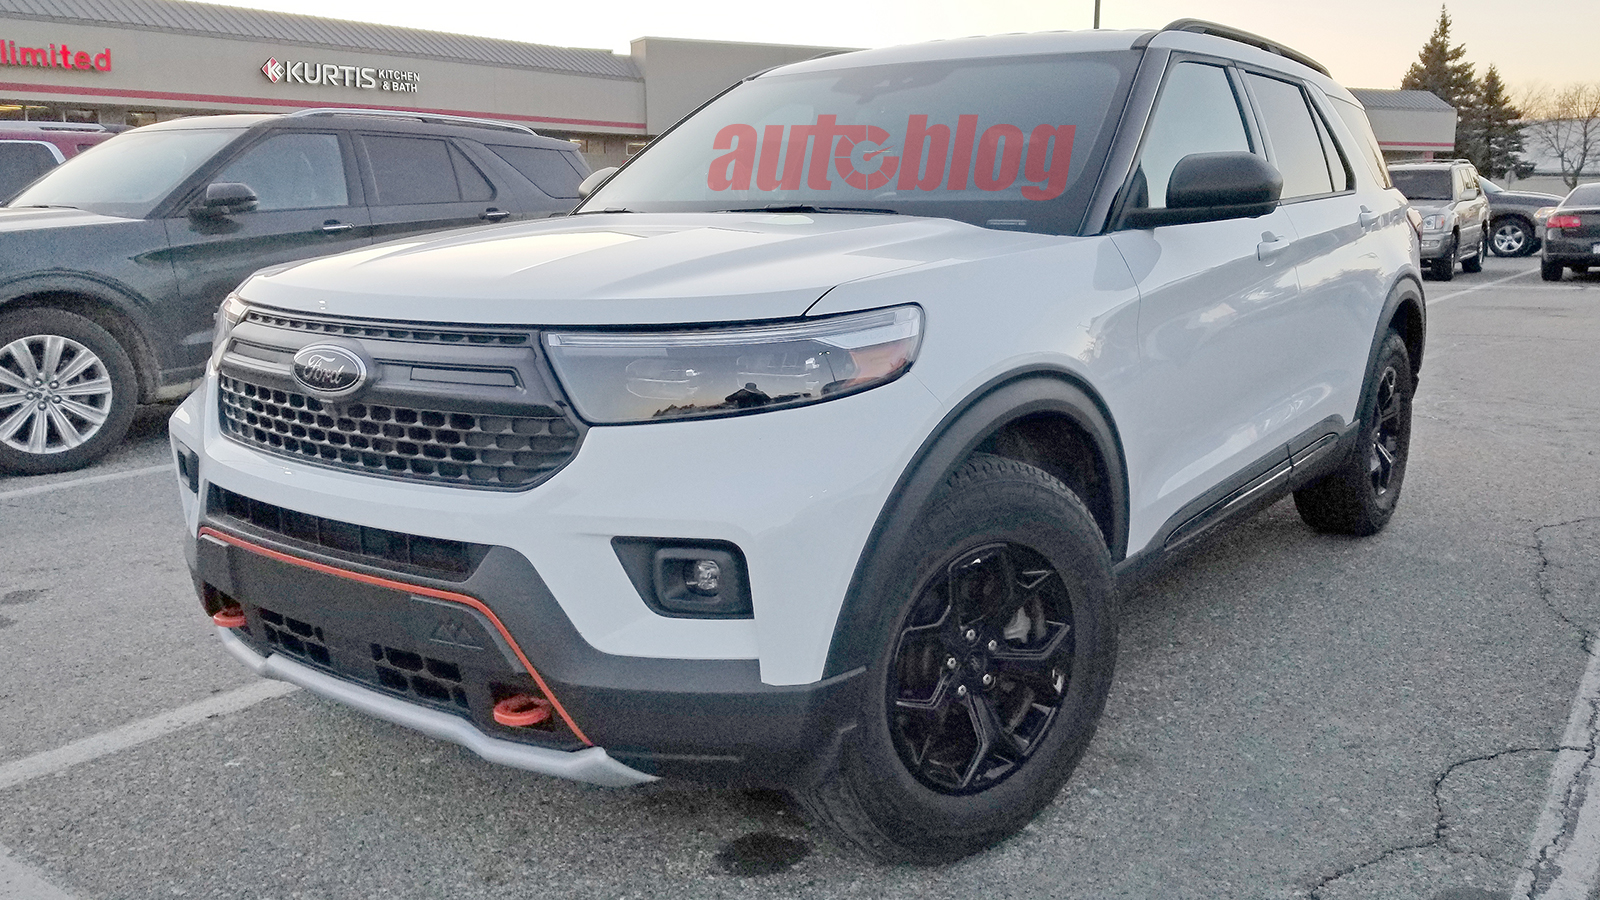 Spy photos show 2022 Ford Explorer Timberline completely undisguised